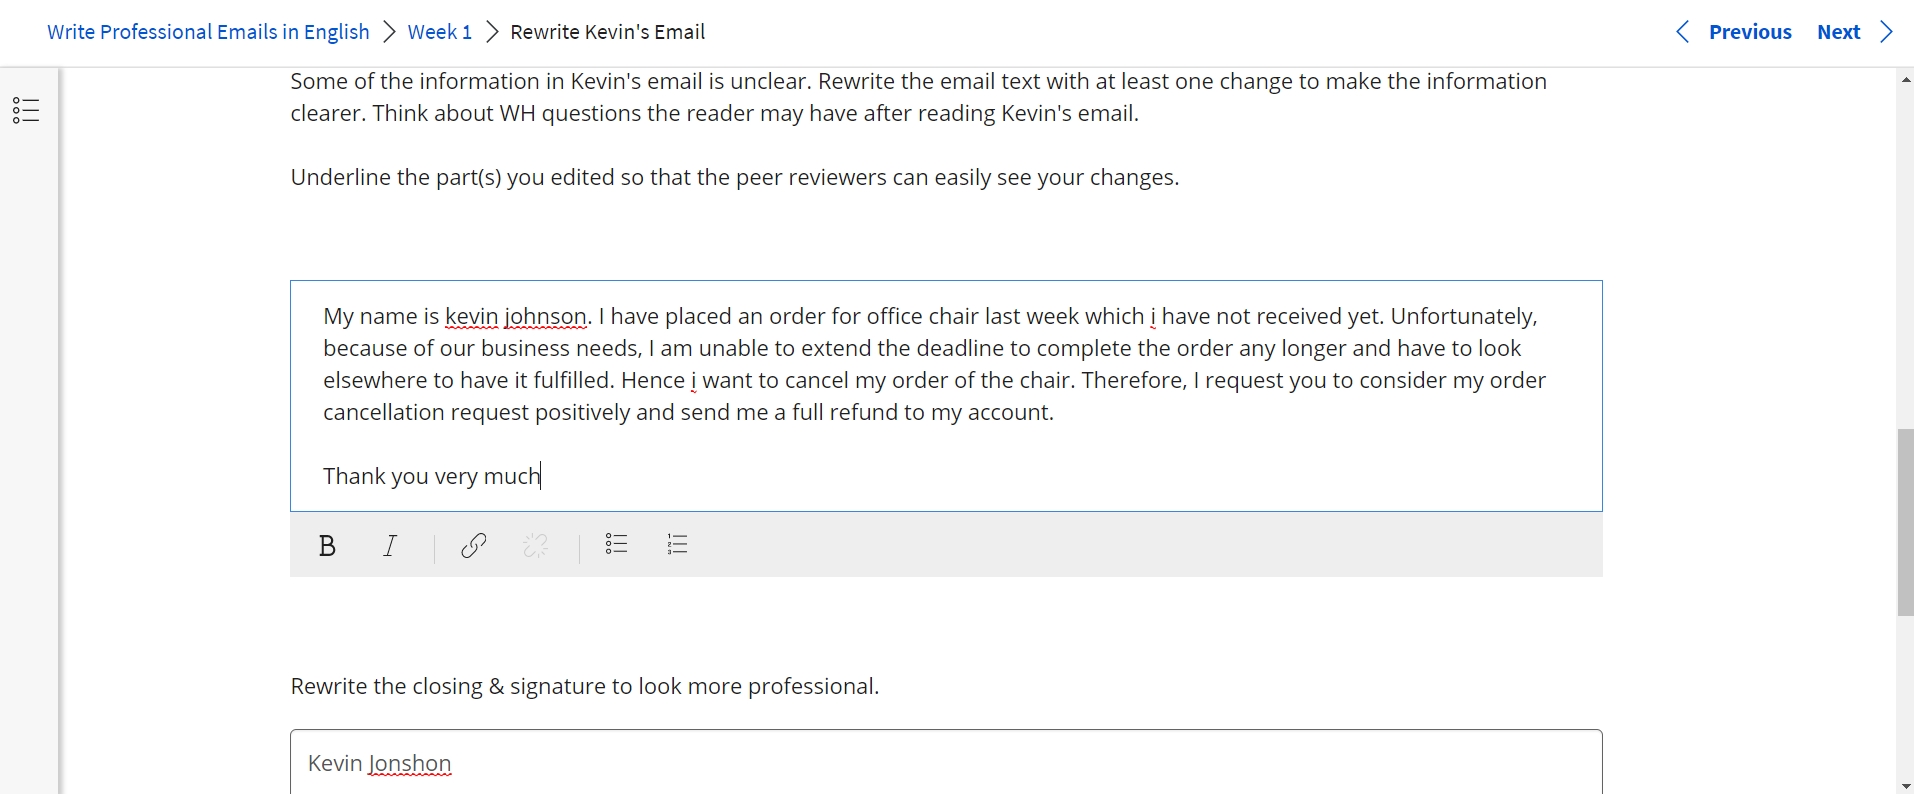 write professional emails in english week 1 assignment answers